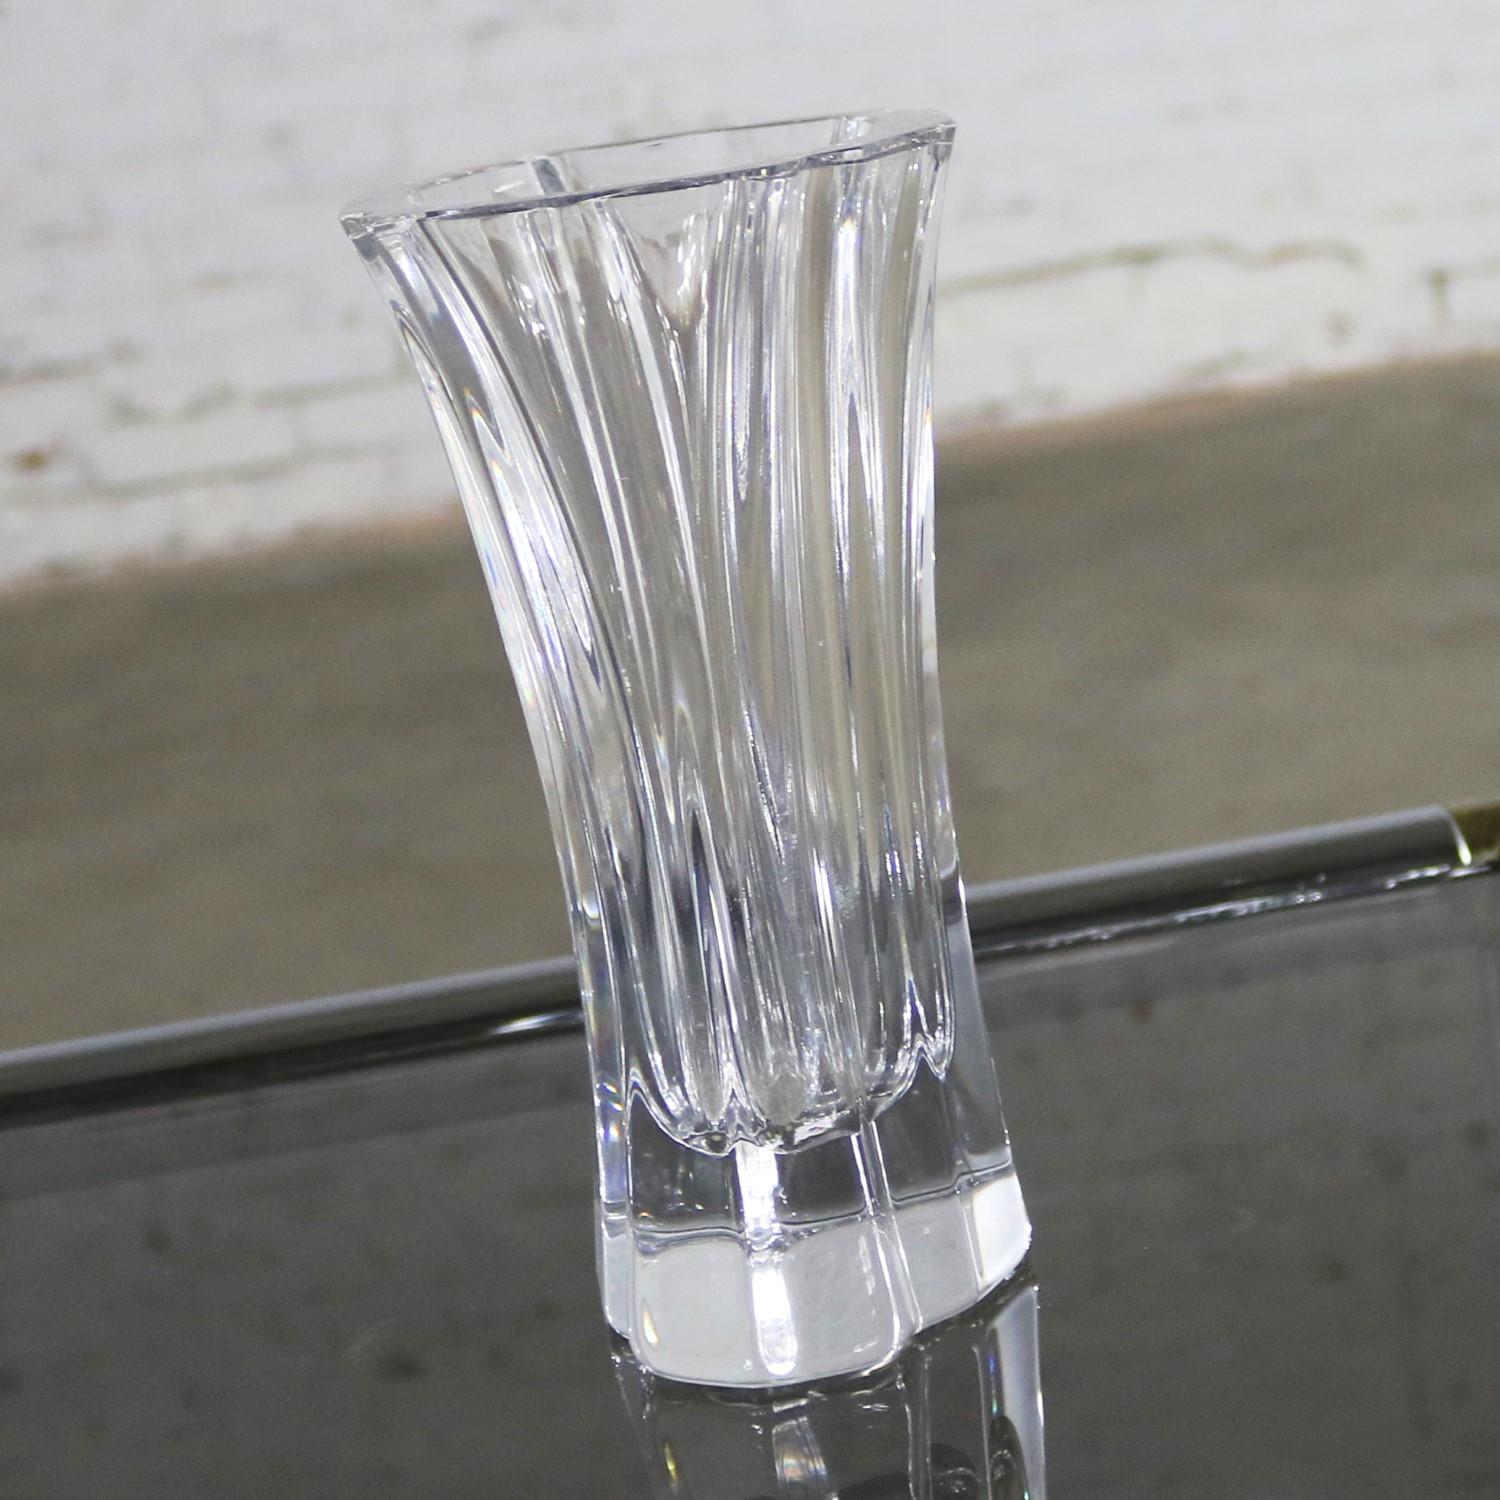 Orrefors Crystal Vase by Lars Hellsten Signed and Numbered LH 4599-22 1